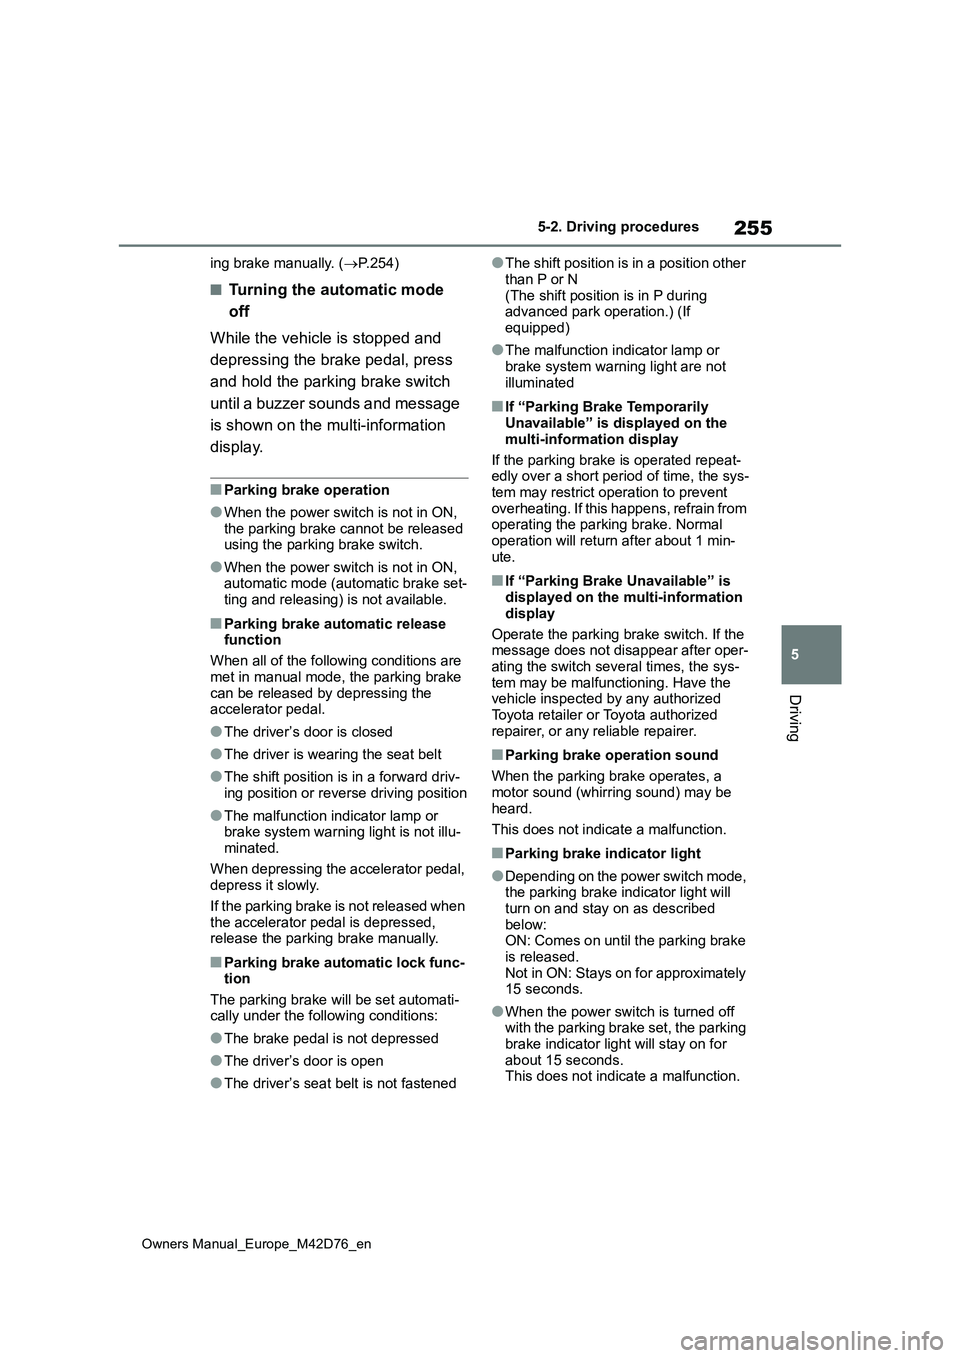 TOYOTA BZ4X 2022  Owners Manual (in English) 255
5
Owners Manual_Europe_M42D76_en
5-2. Driving procedures
Driving
ing brake manually. (P.254)
■Turning the automatic mode  
off 
While the vehicle is stopped and  
depressing the brake pedal, 